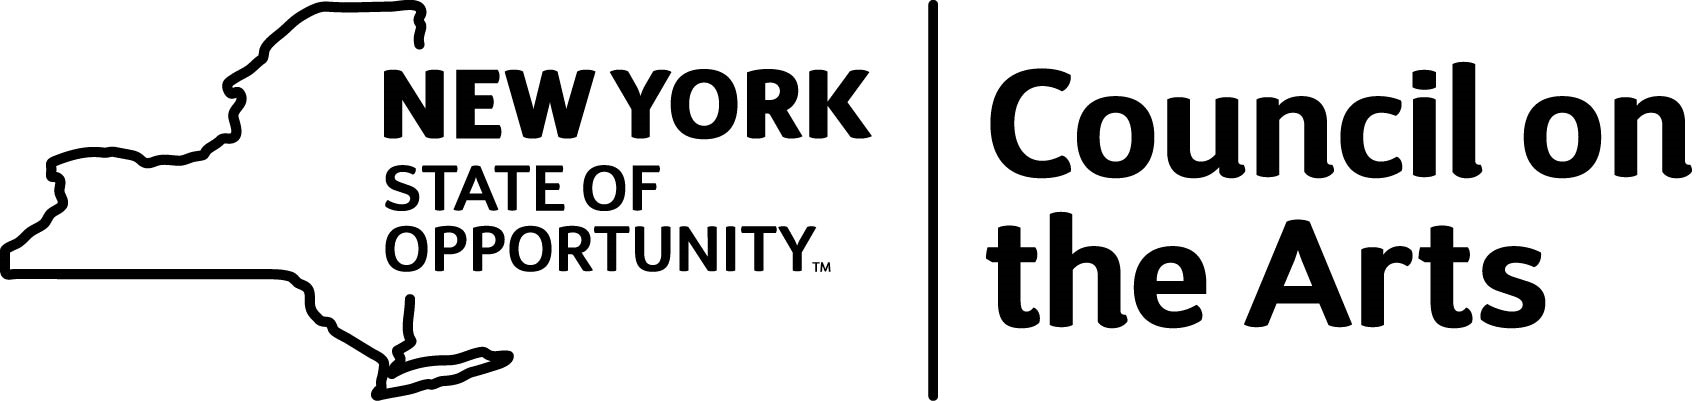 New York State of Opportunity Council on the Arts logo